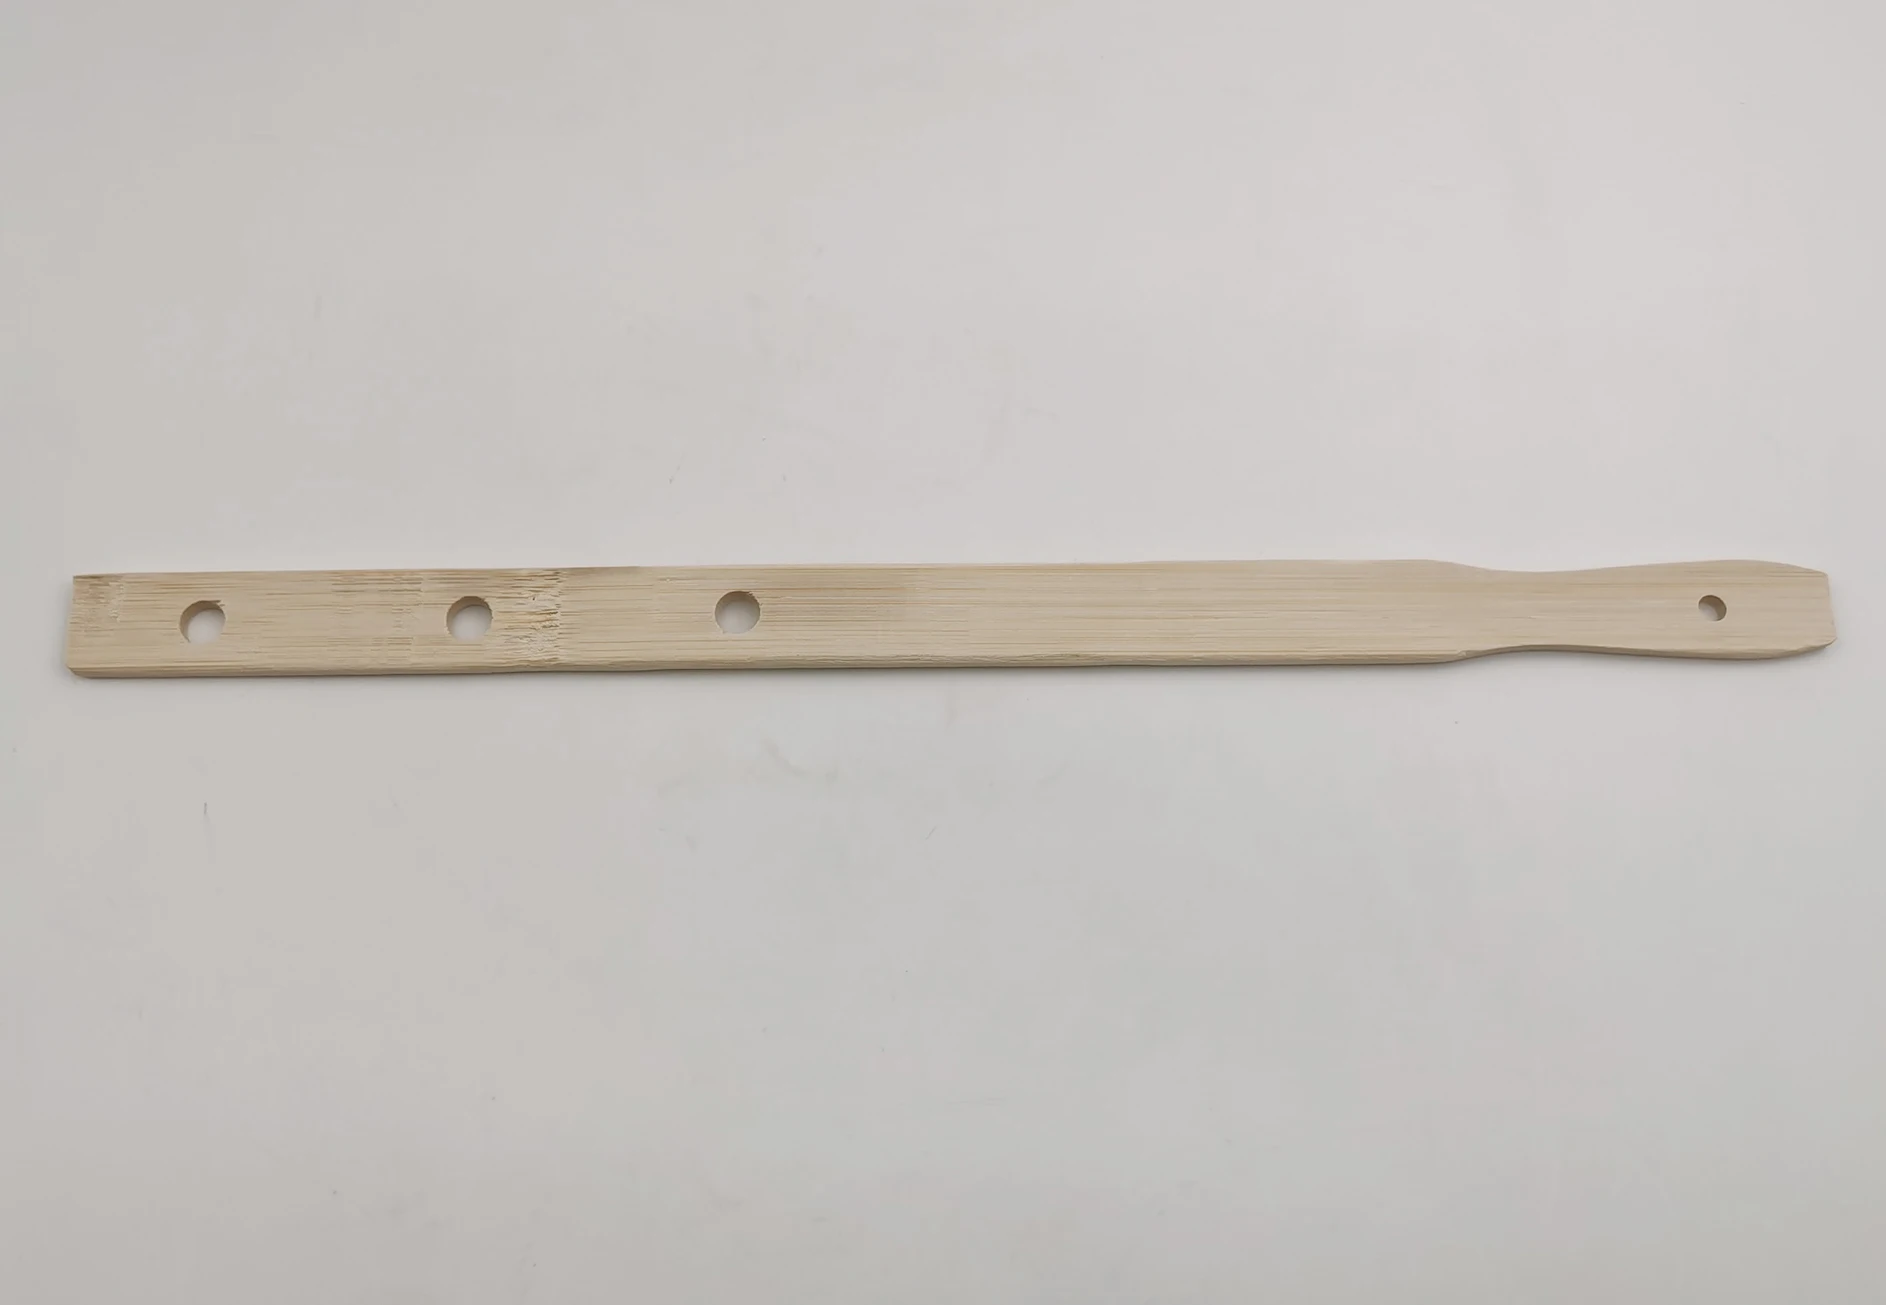 Bamboo Paint Stir Stick With Holes